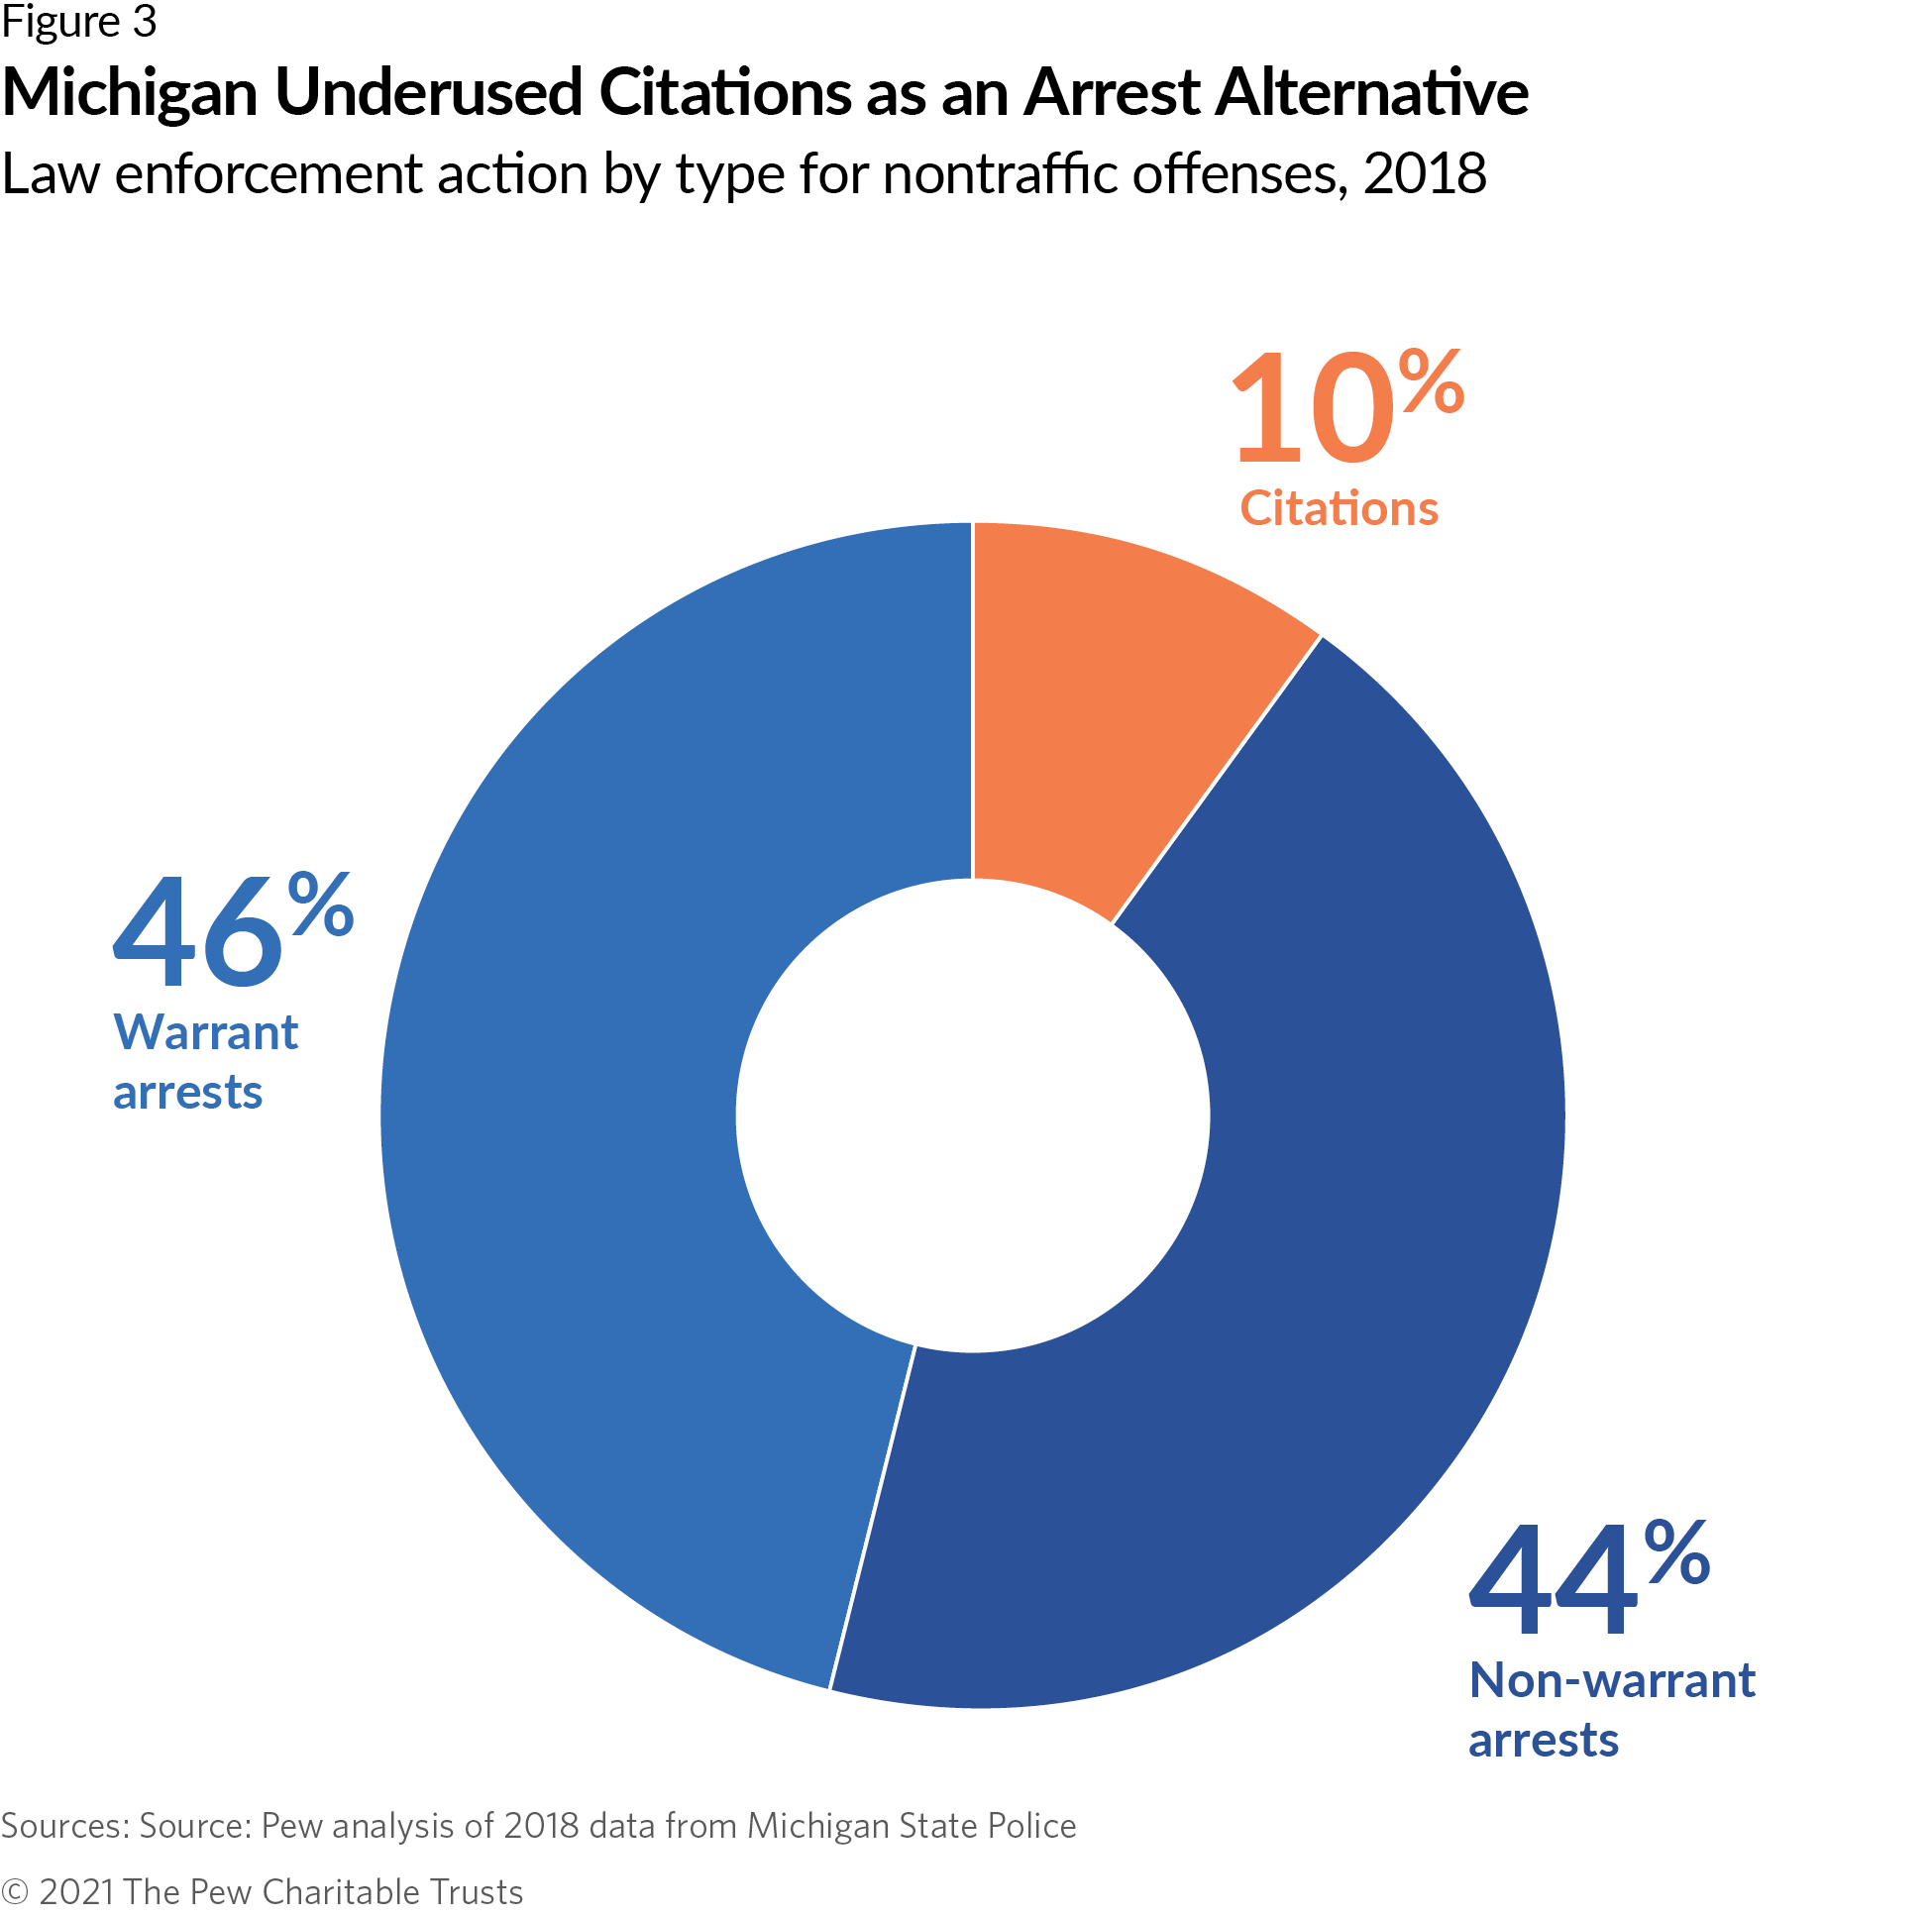 Michigan Underused Citations as an Arrest Alternative Law enforcement action by type for nontraffic offenses, 2018